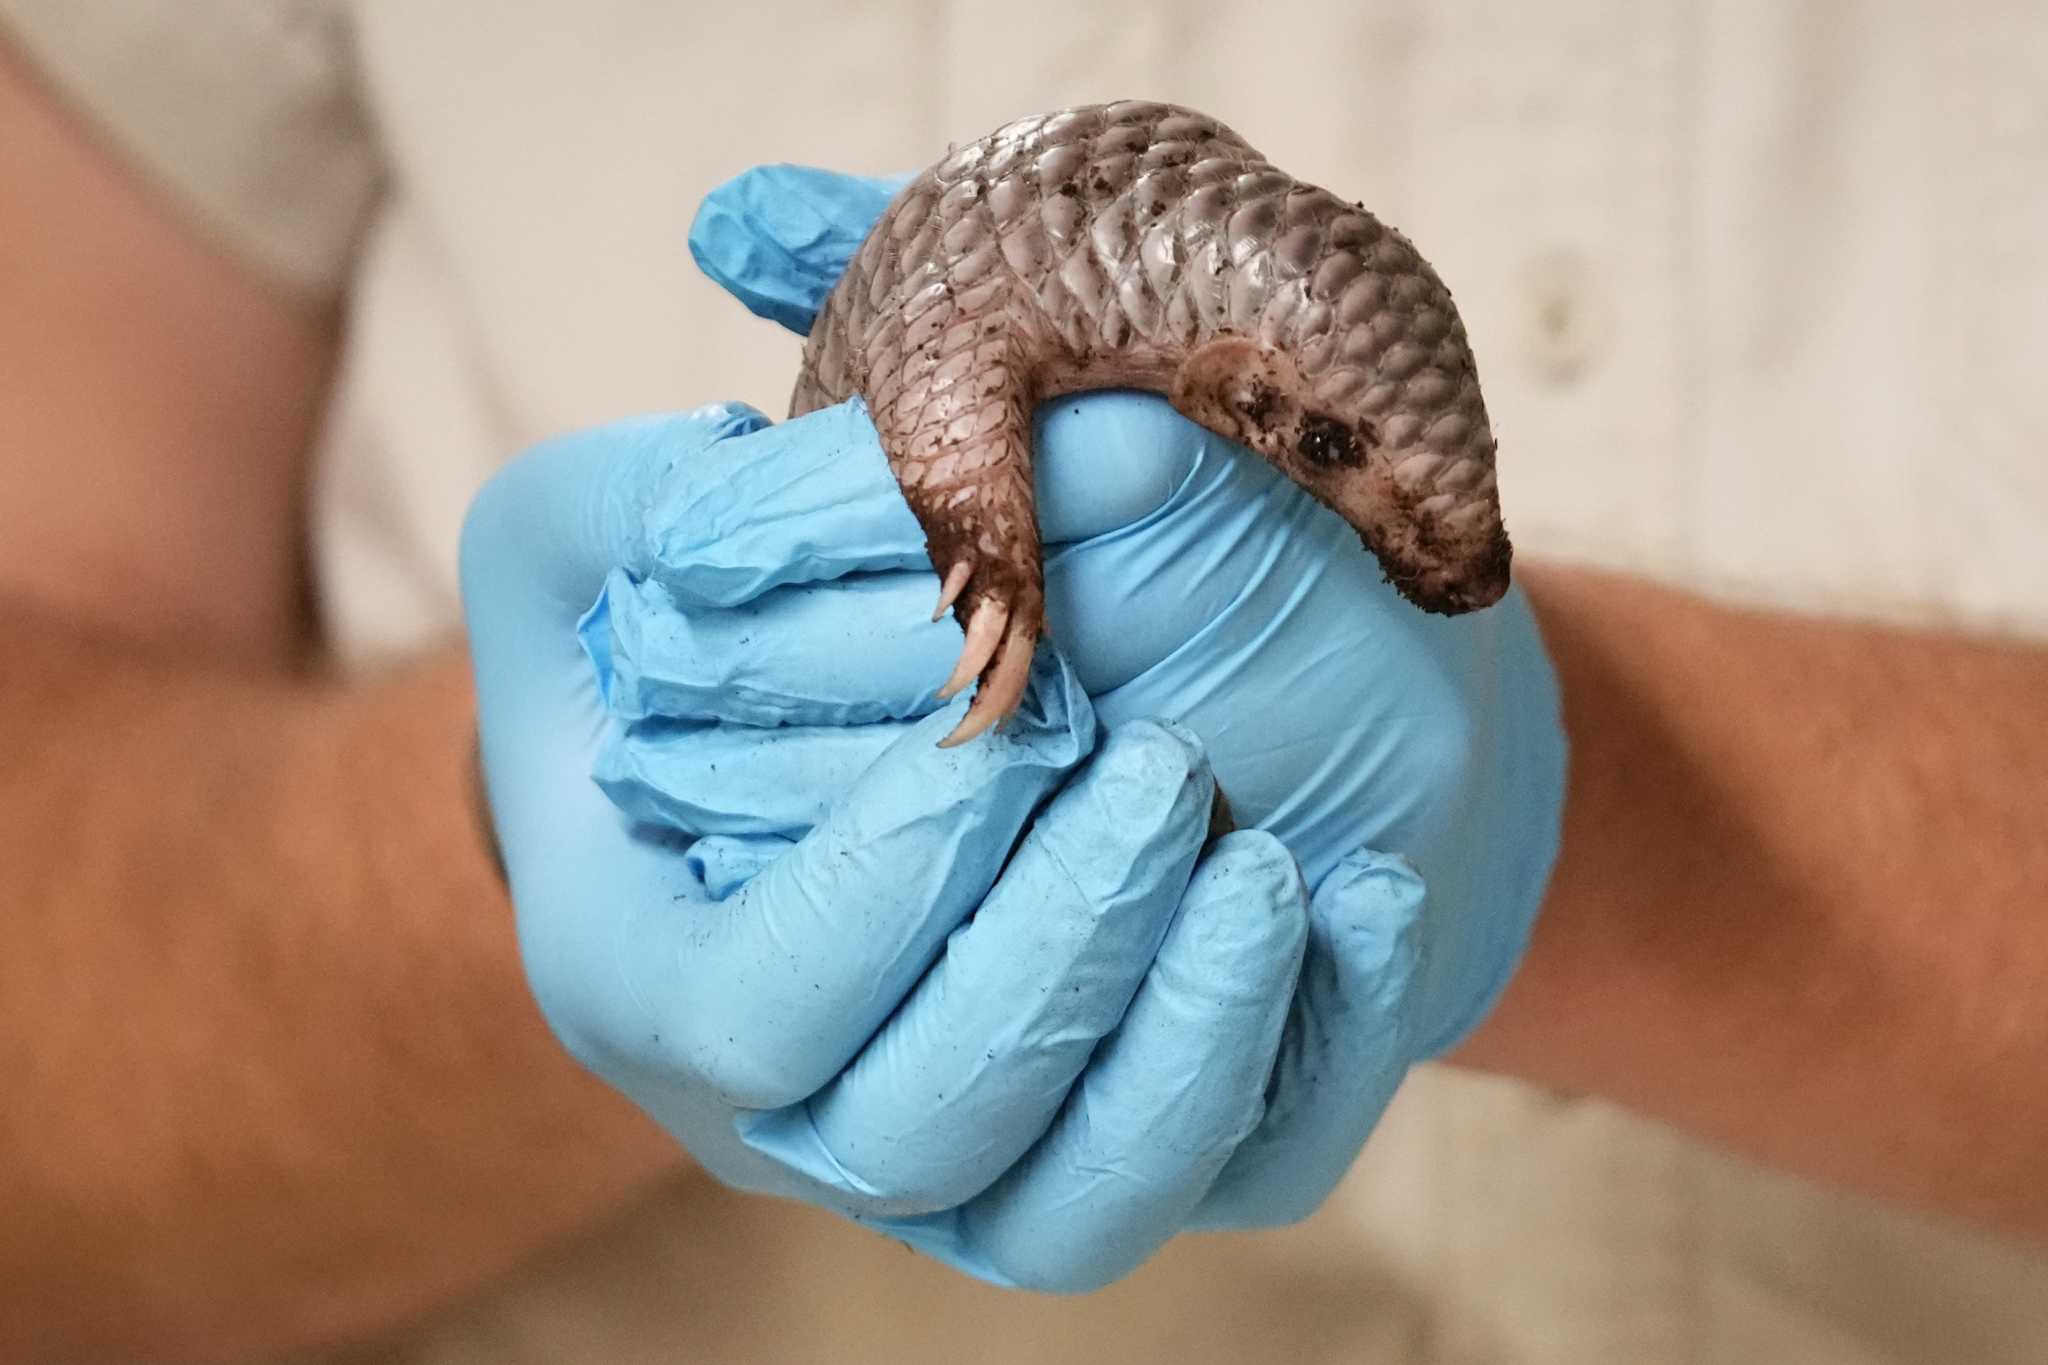 A second critically endangered Chinese pangolin is born in the Prague zoo in less than 2 years